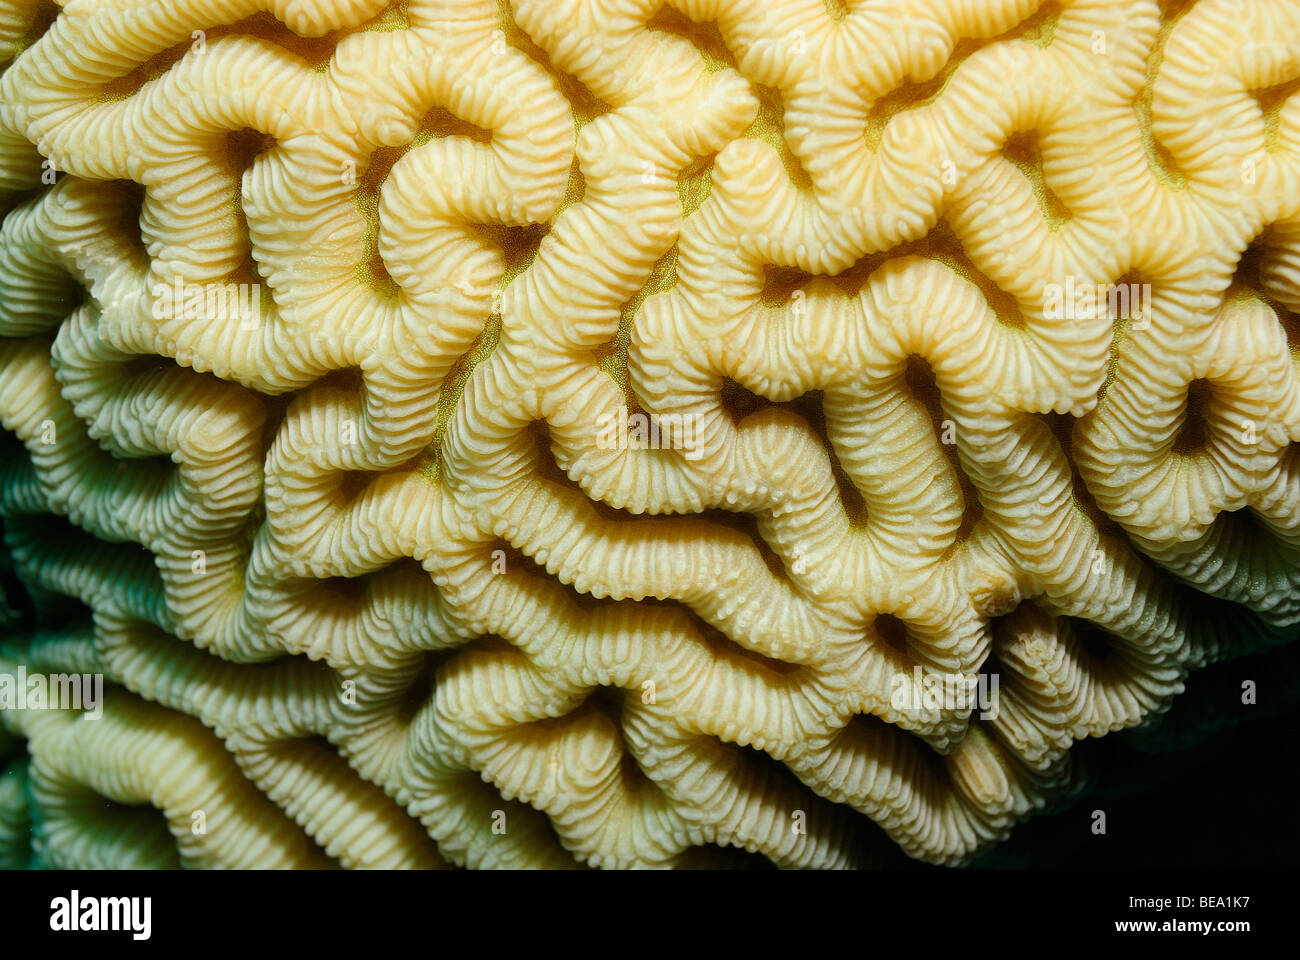 Colony of hard coral in the Red Sea, Egypt Stock Photo